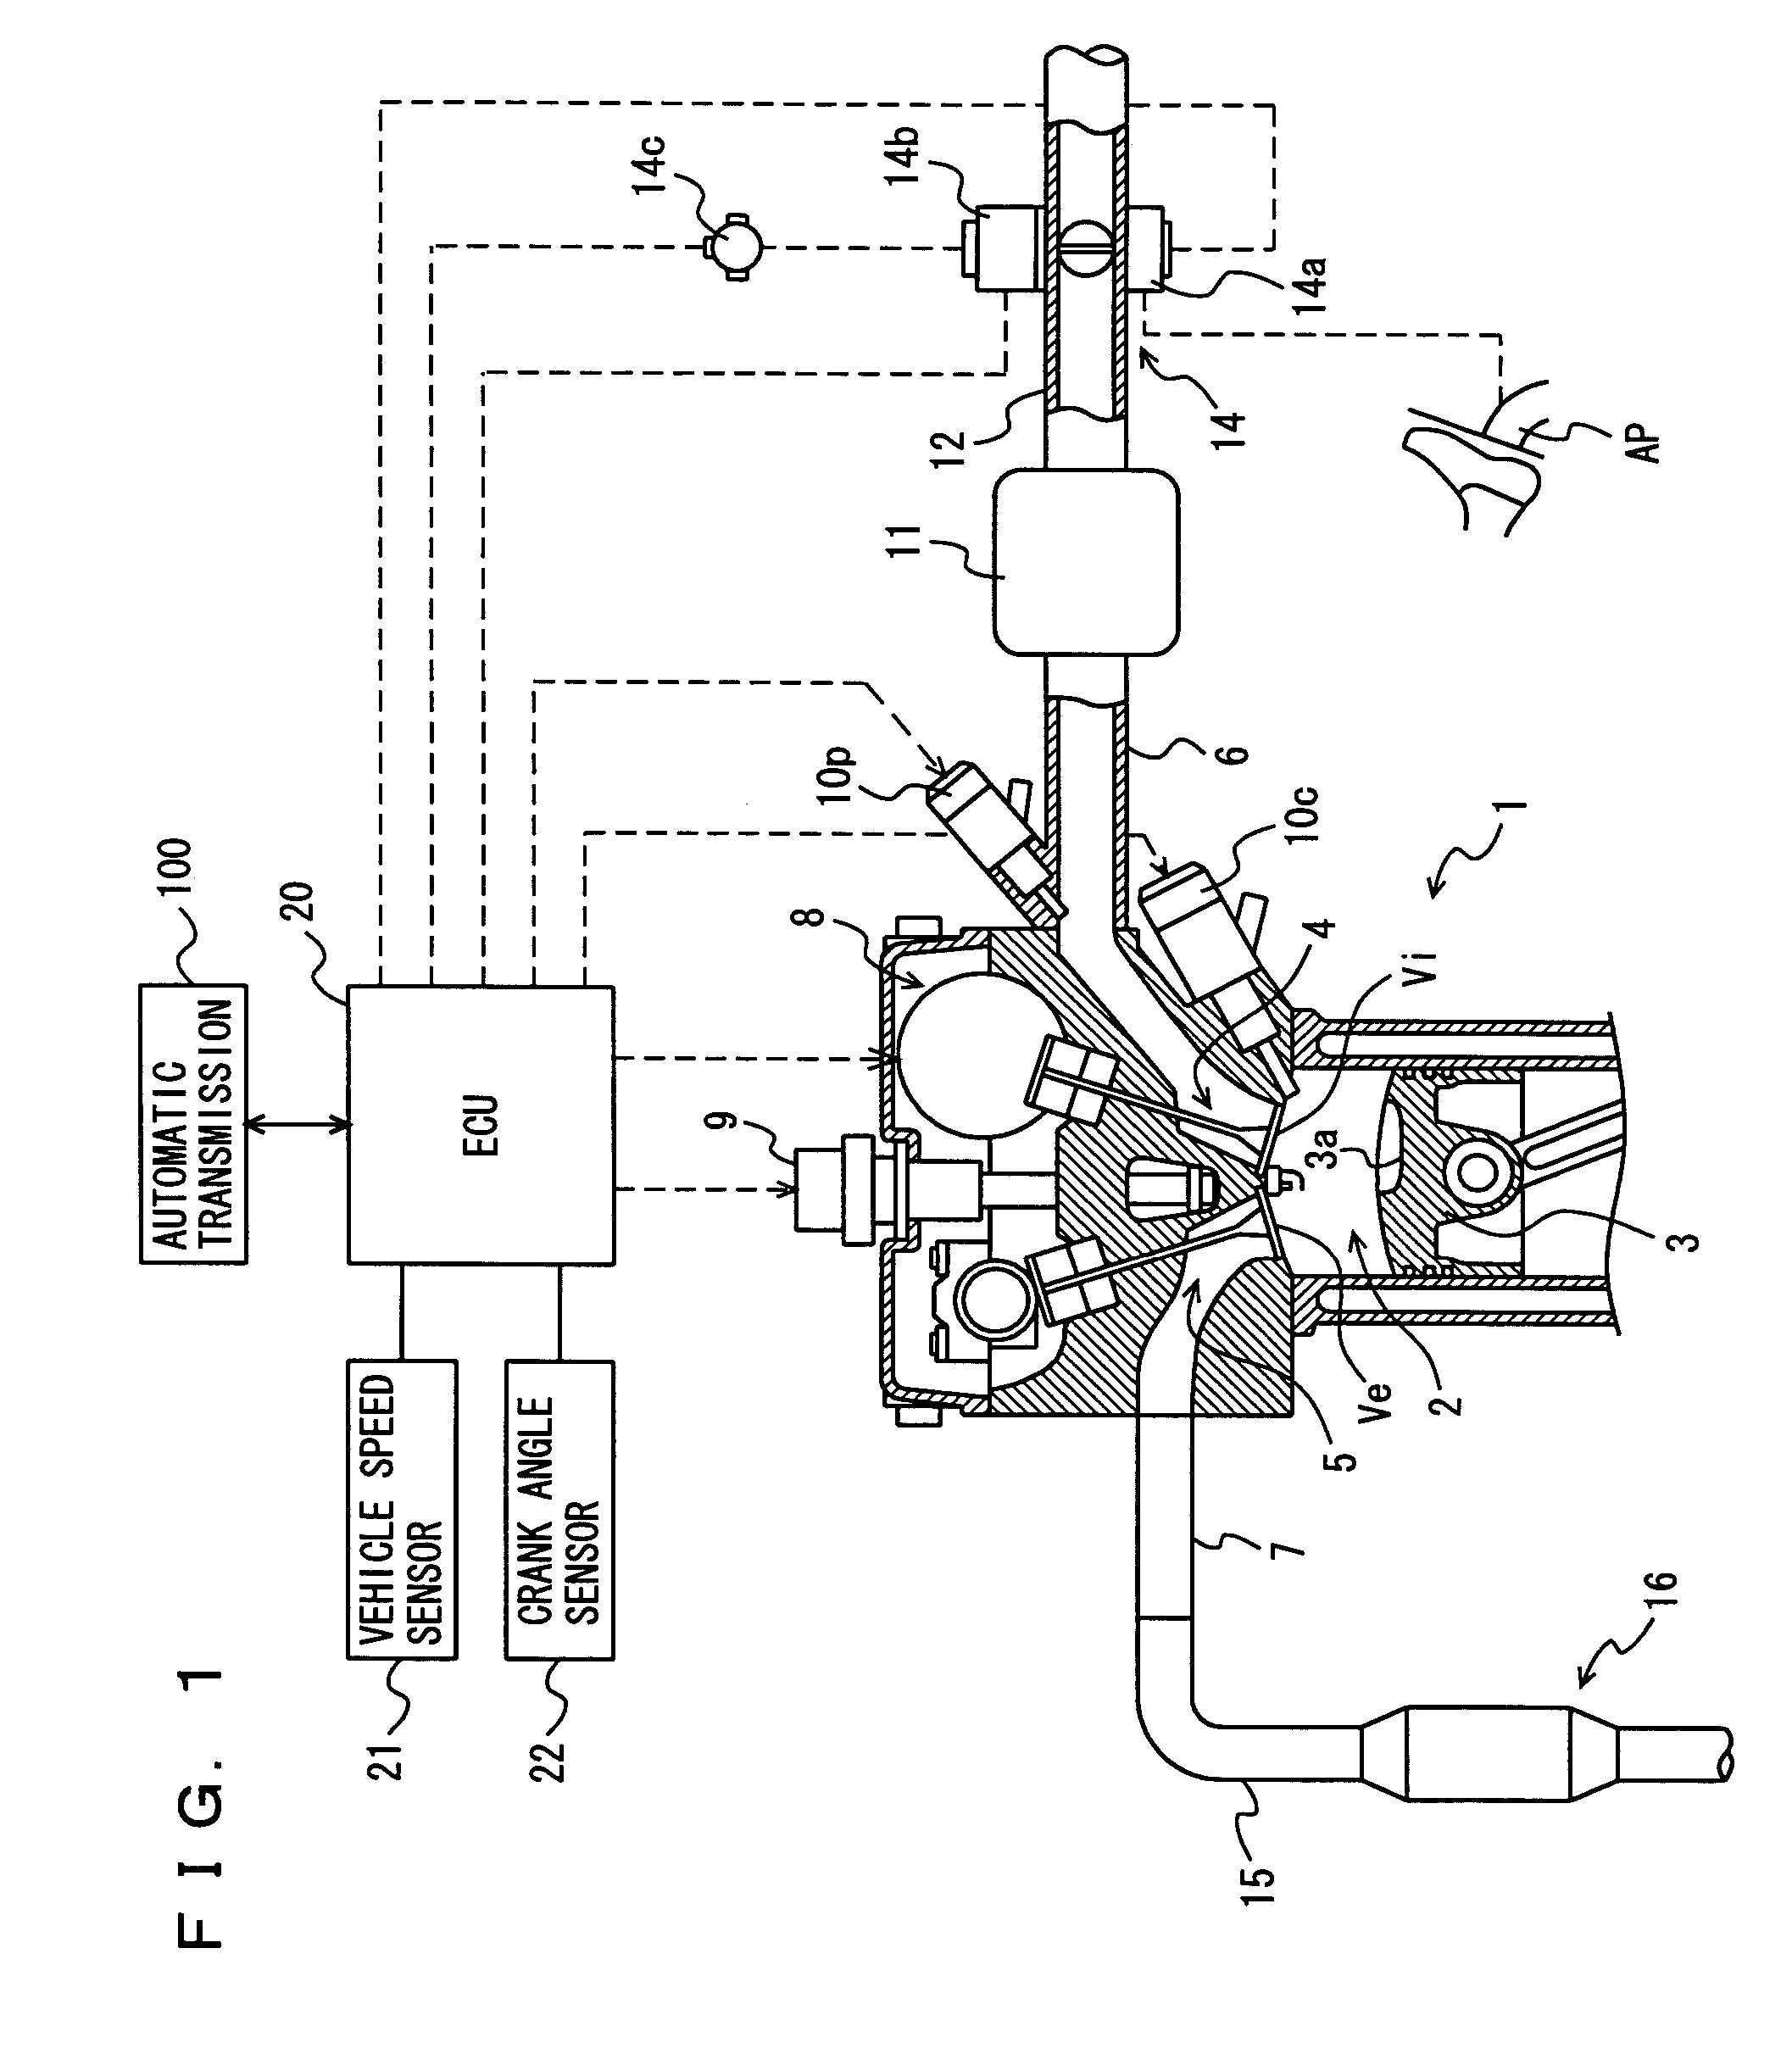 Device and method for controlling internal combustion engine